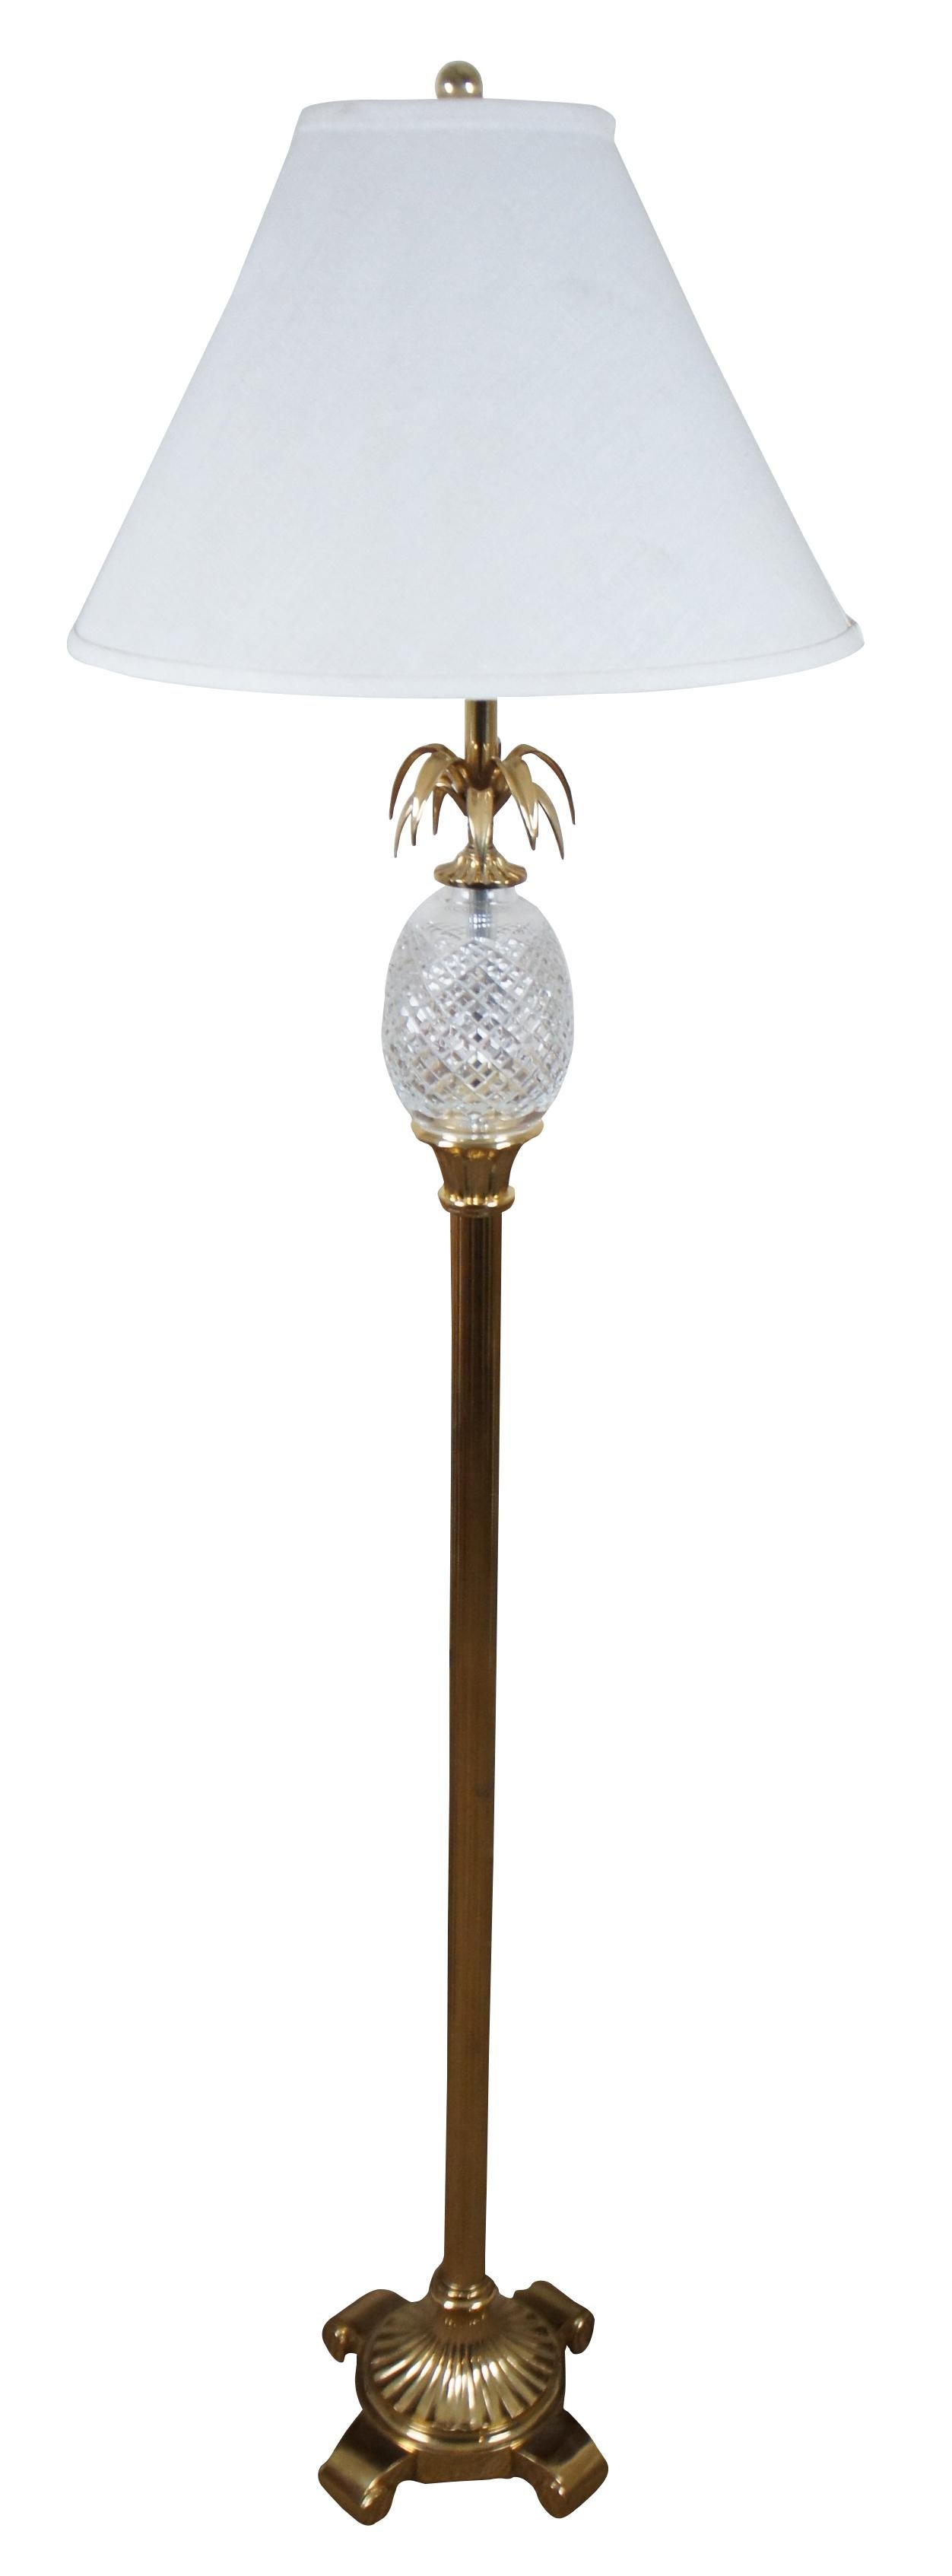 Vintage Waterford Irish crystal floor lamp with neoclassical and Hollywood Regency styling featuring a brass column base, topped with a crystal pineapple with brass leaves, and a white shade.

Measures: 10” x 54.5” / Shade - 17” x 12” / Height to